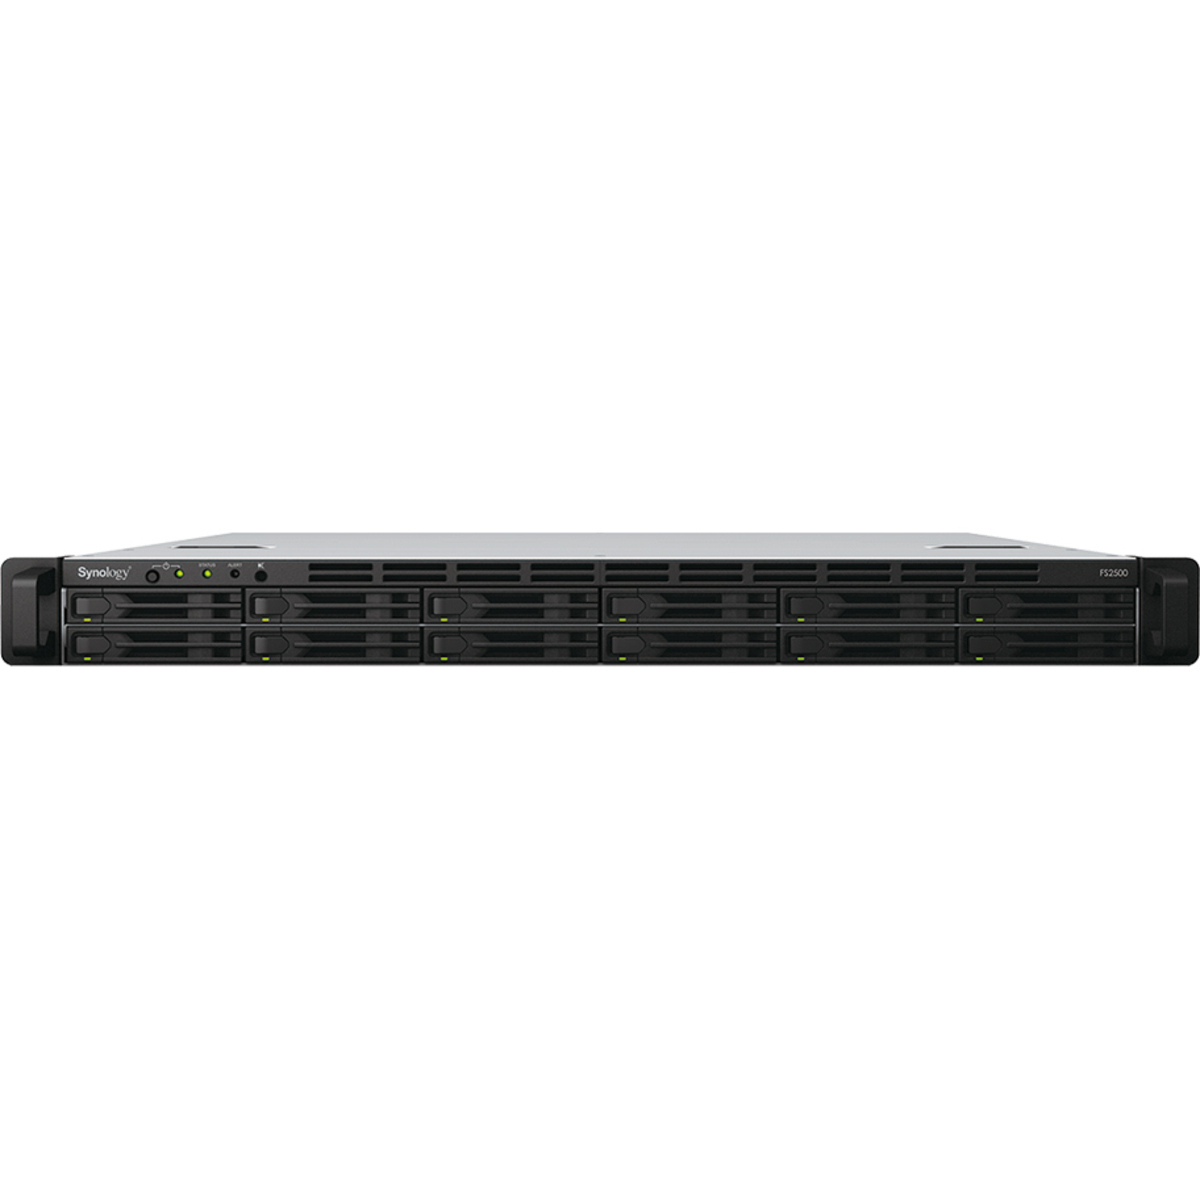 Synology FlashStation FS2500 32tb 12-Bay RackMount Large Business / Enterprise NAS - Network Attached Storage Device 8x4tb Crucial MX500 CT4000MX500SSD1 2.5 560/510MB/s SATA 6Gb/s SSD CONSUMER Class Drives Installed - Burn-In Tested - FREE RAM UPGRADE FlashStation FS2500